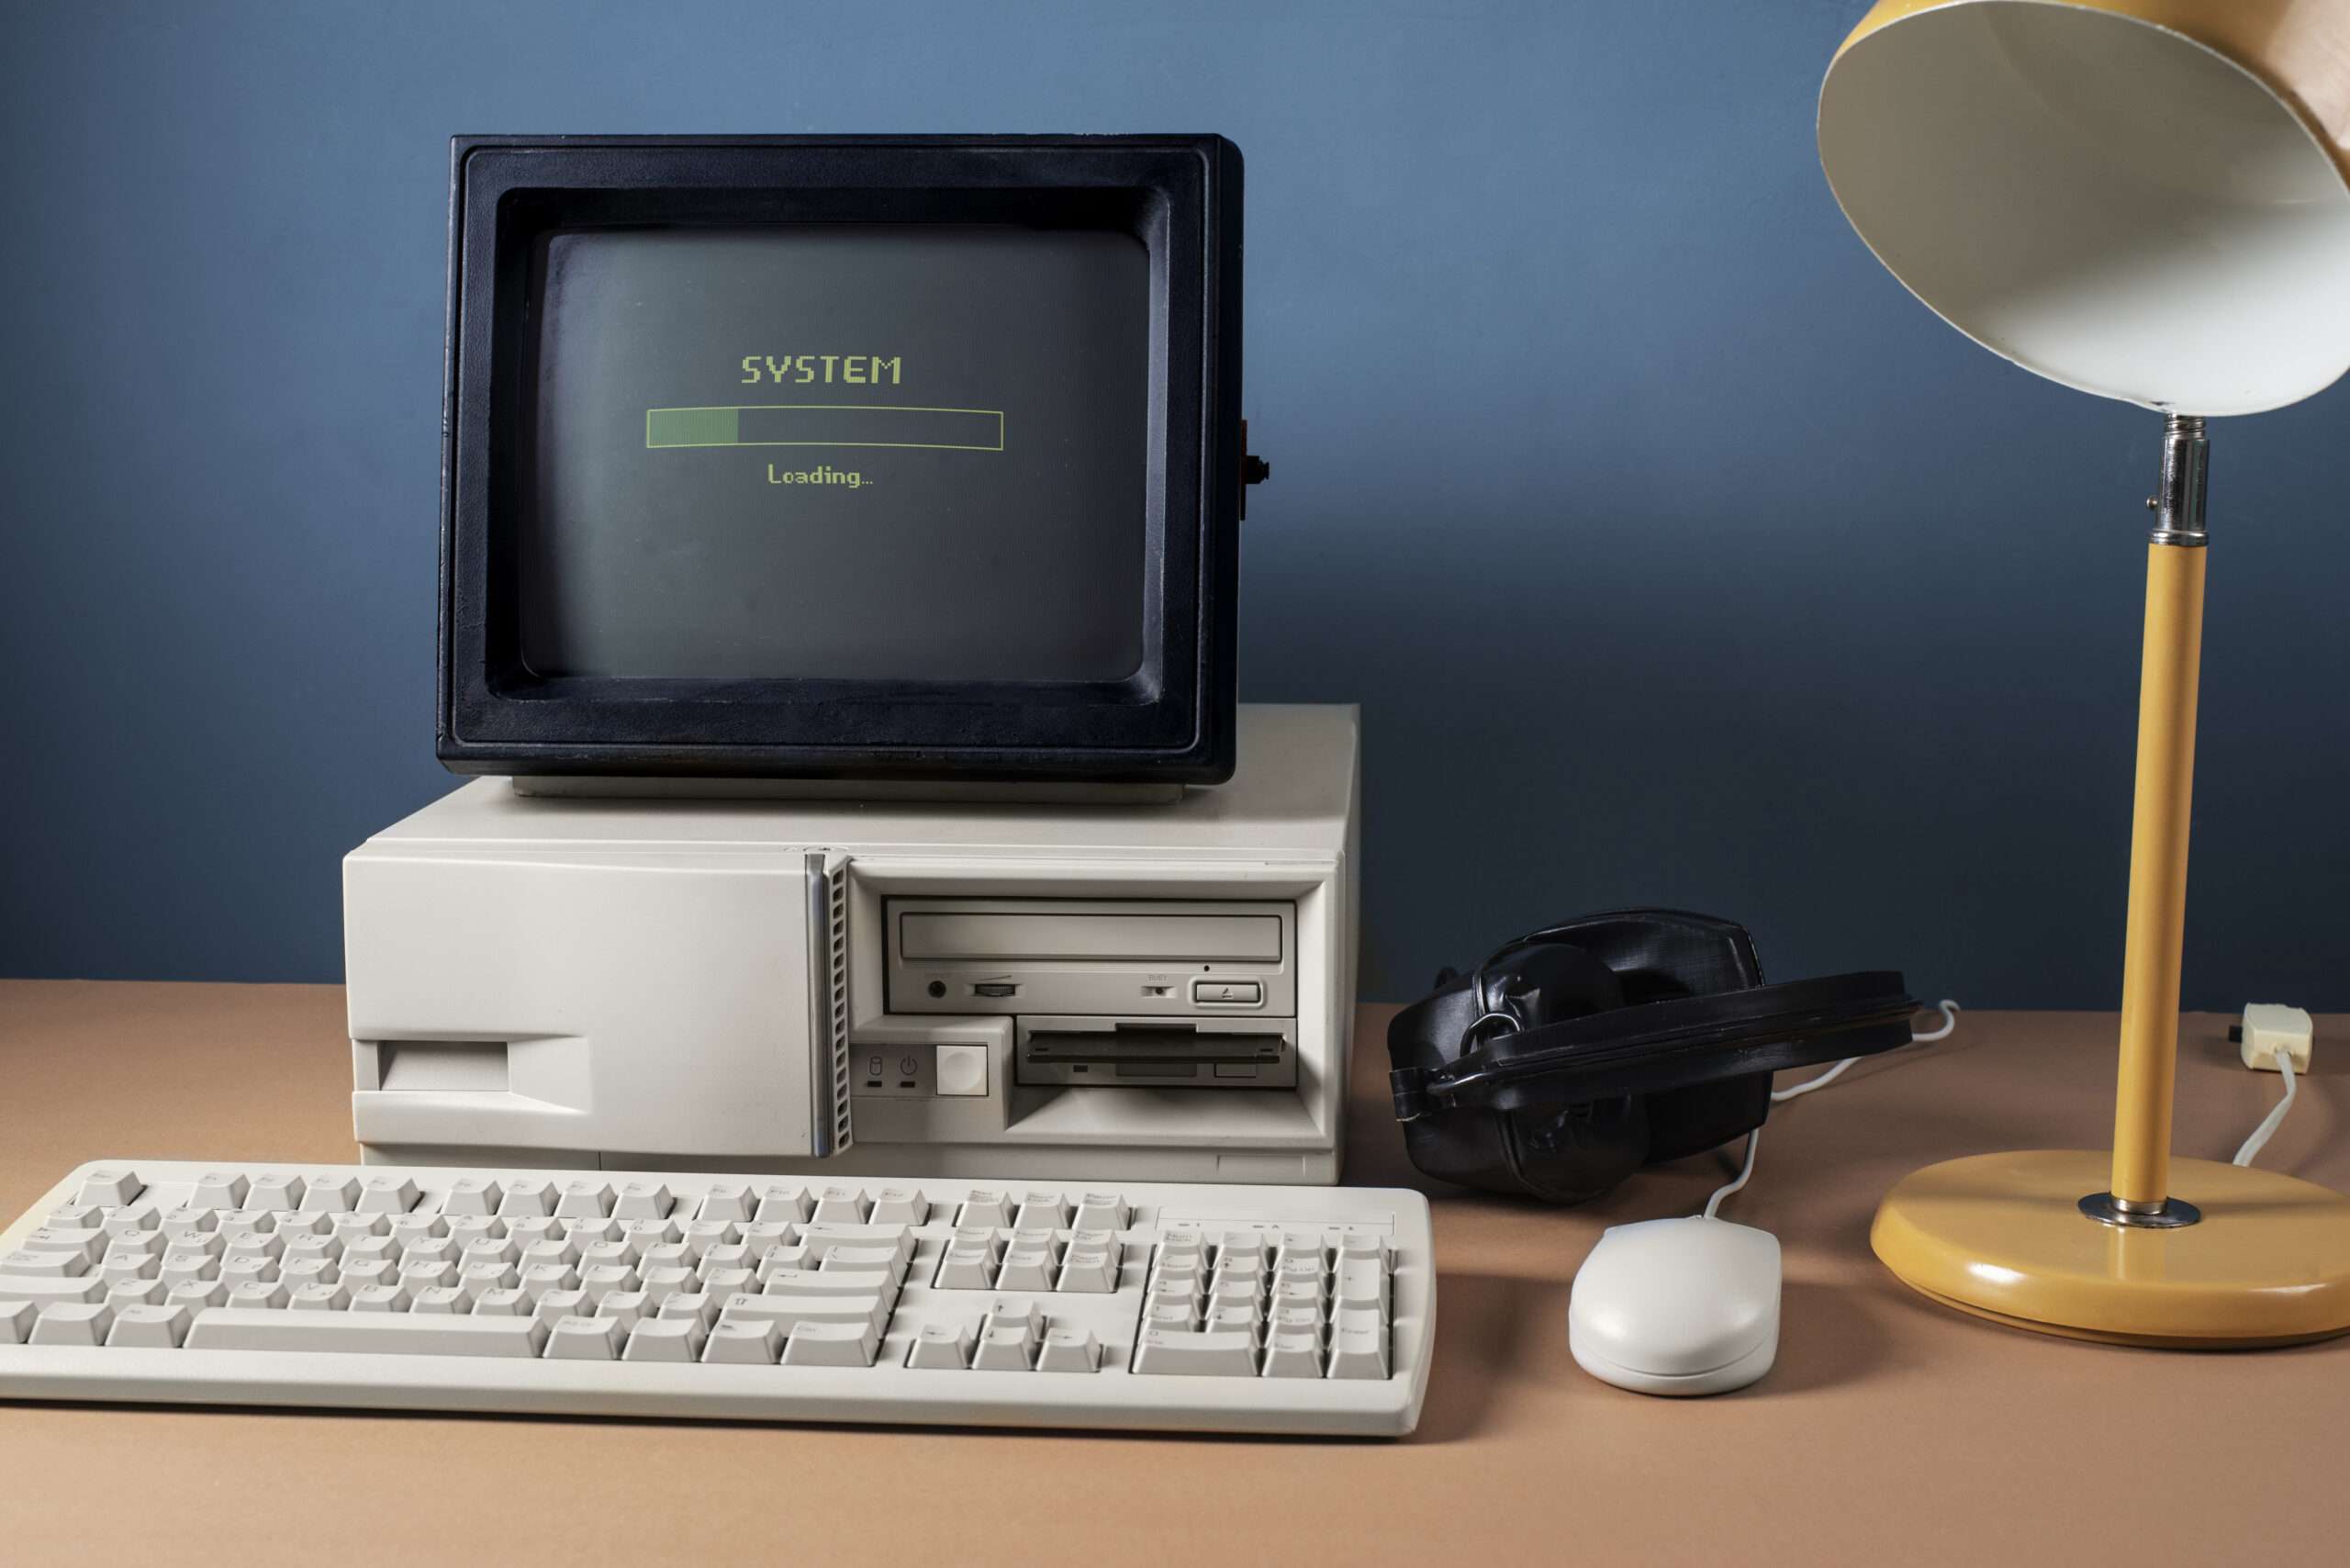 Retro computers that has gone through several transformations